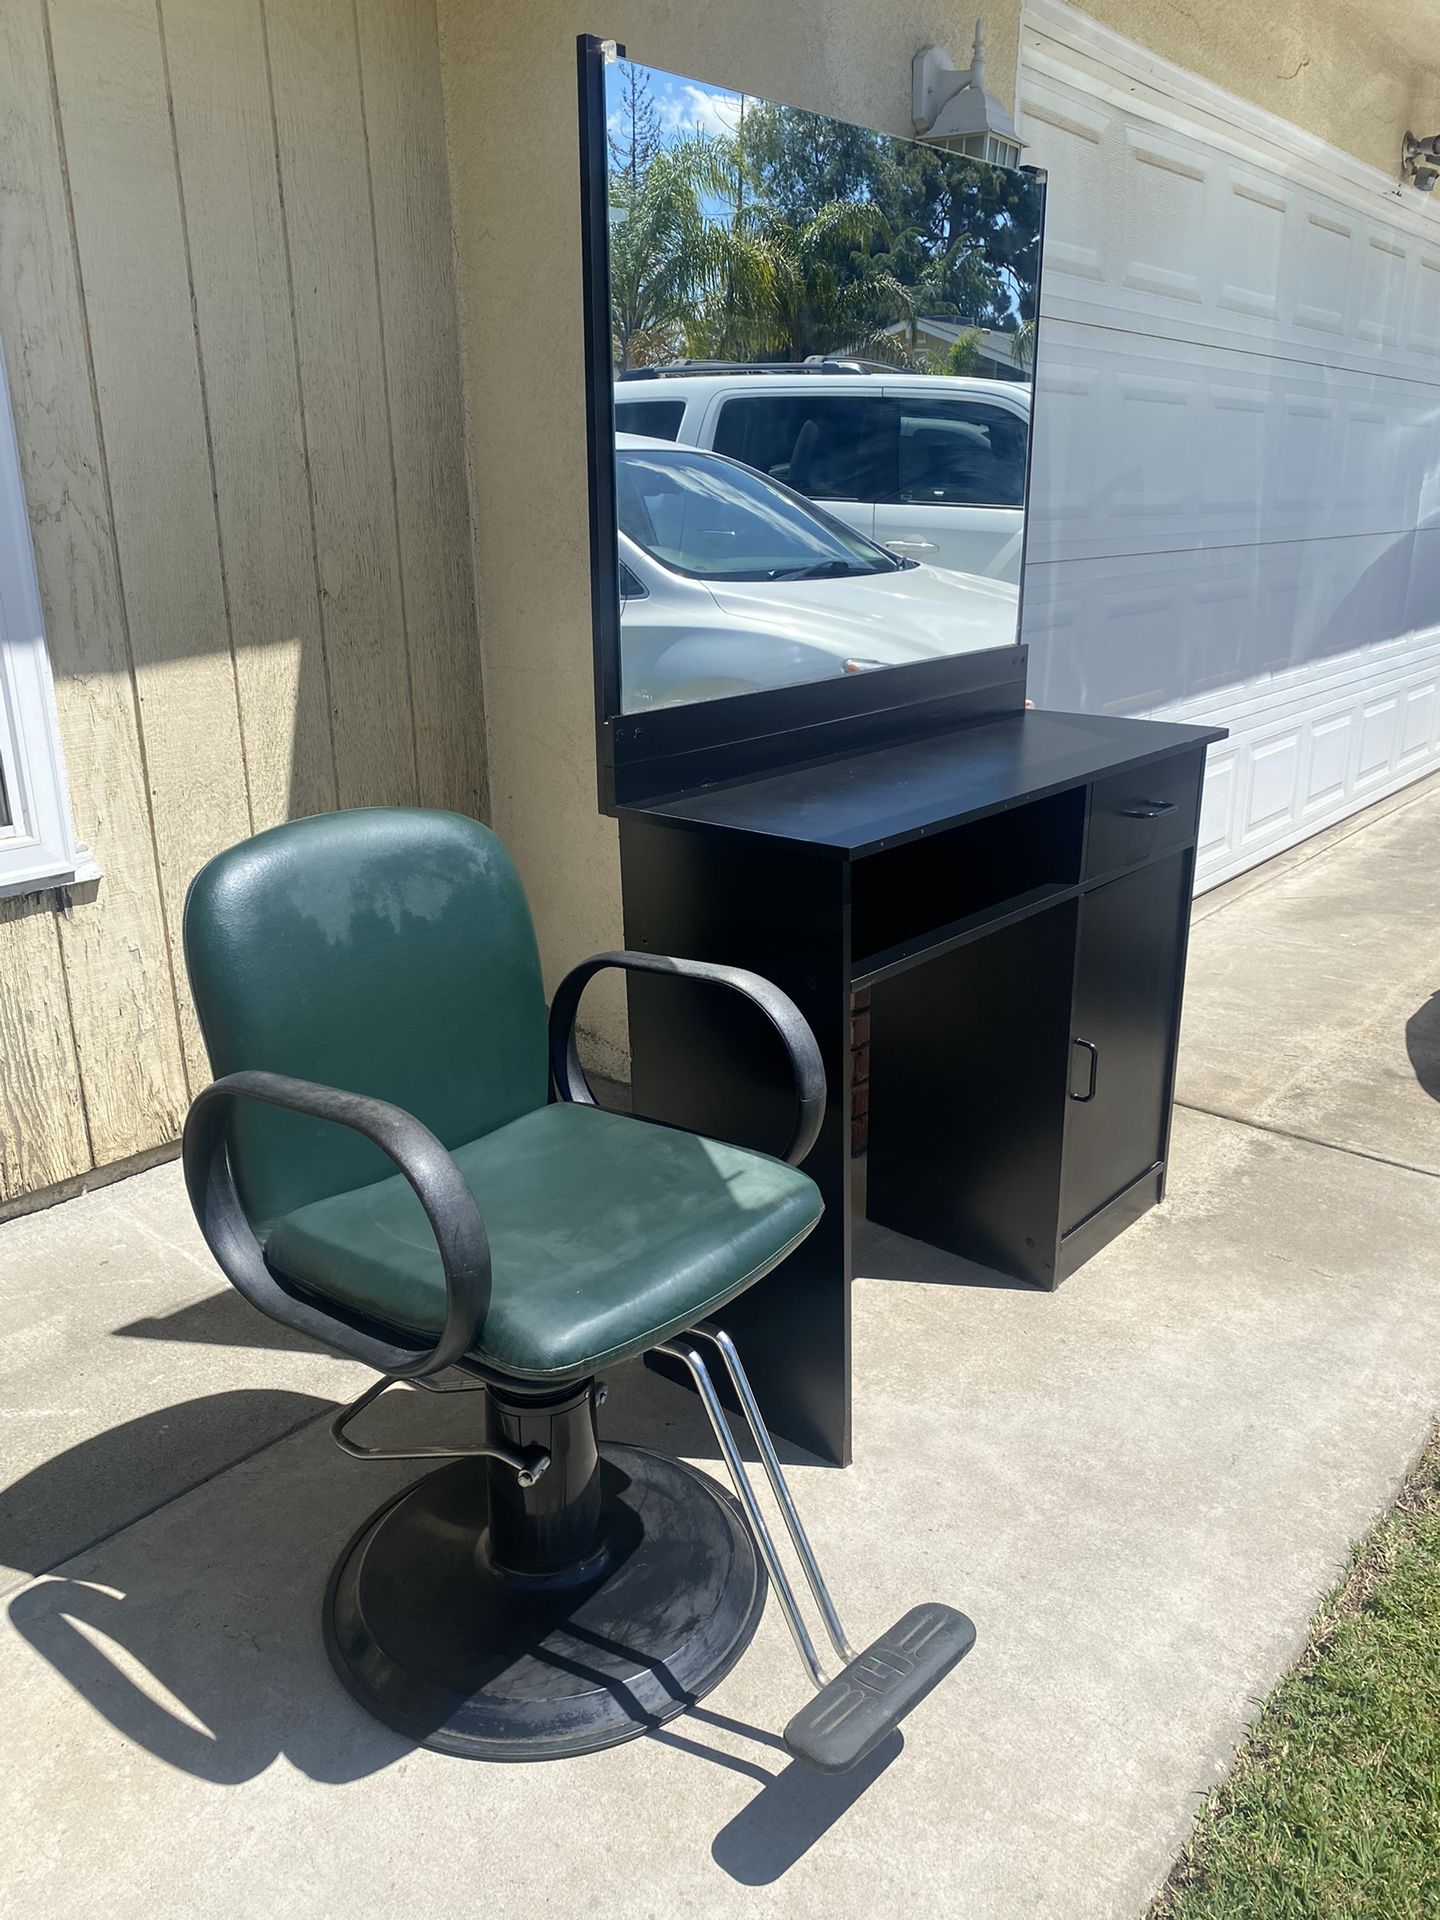 Complete Salon Station $ 350.00 Each Firm On Price 